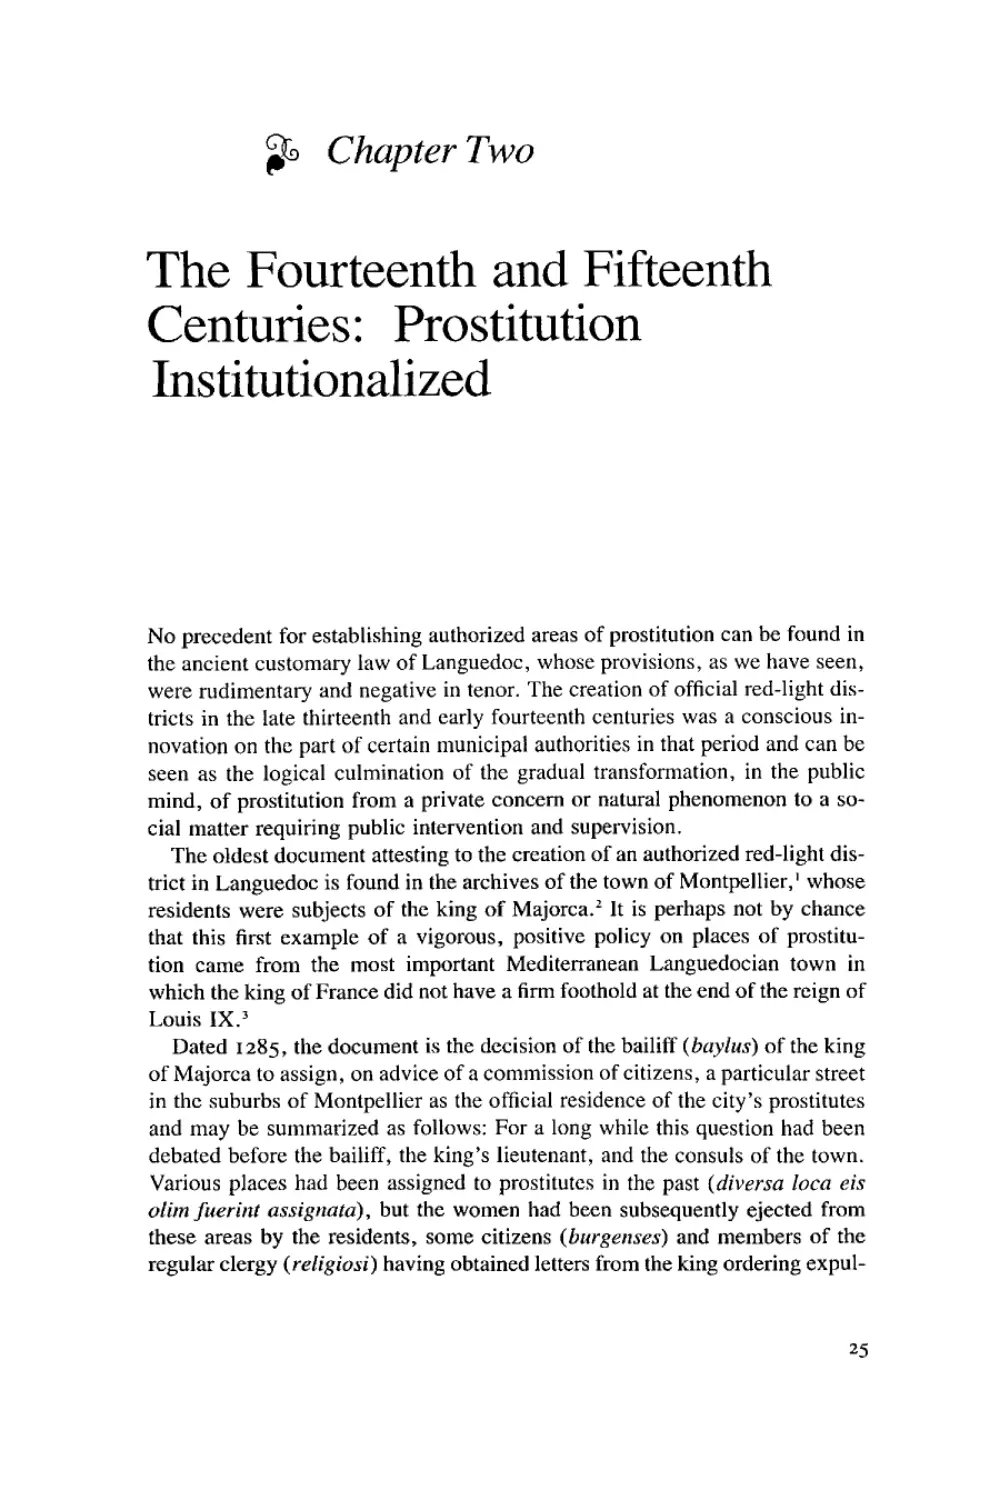 2. The Fourteenth and Fifteenth Centuries: Prostitution Institutionalized